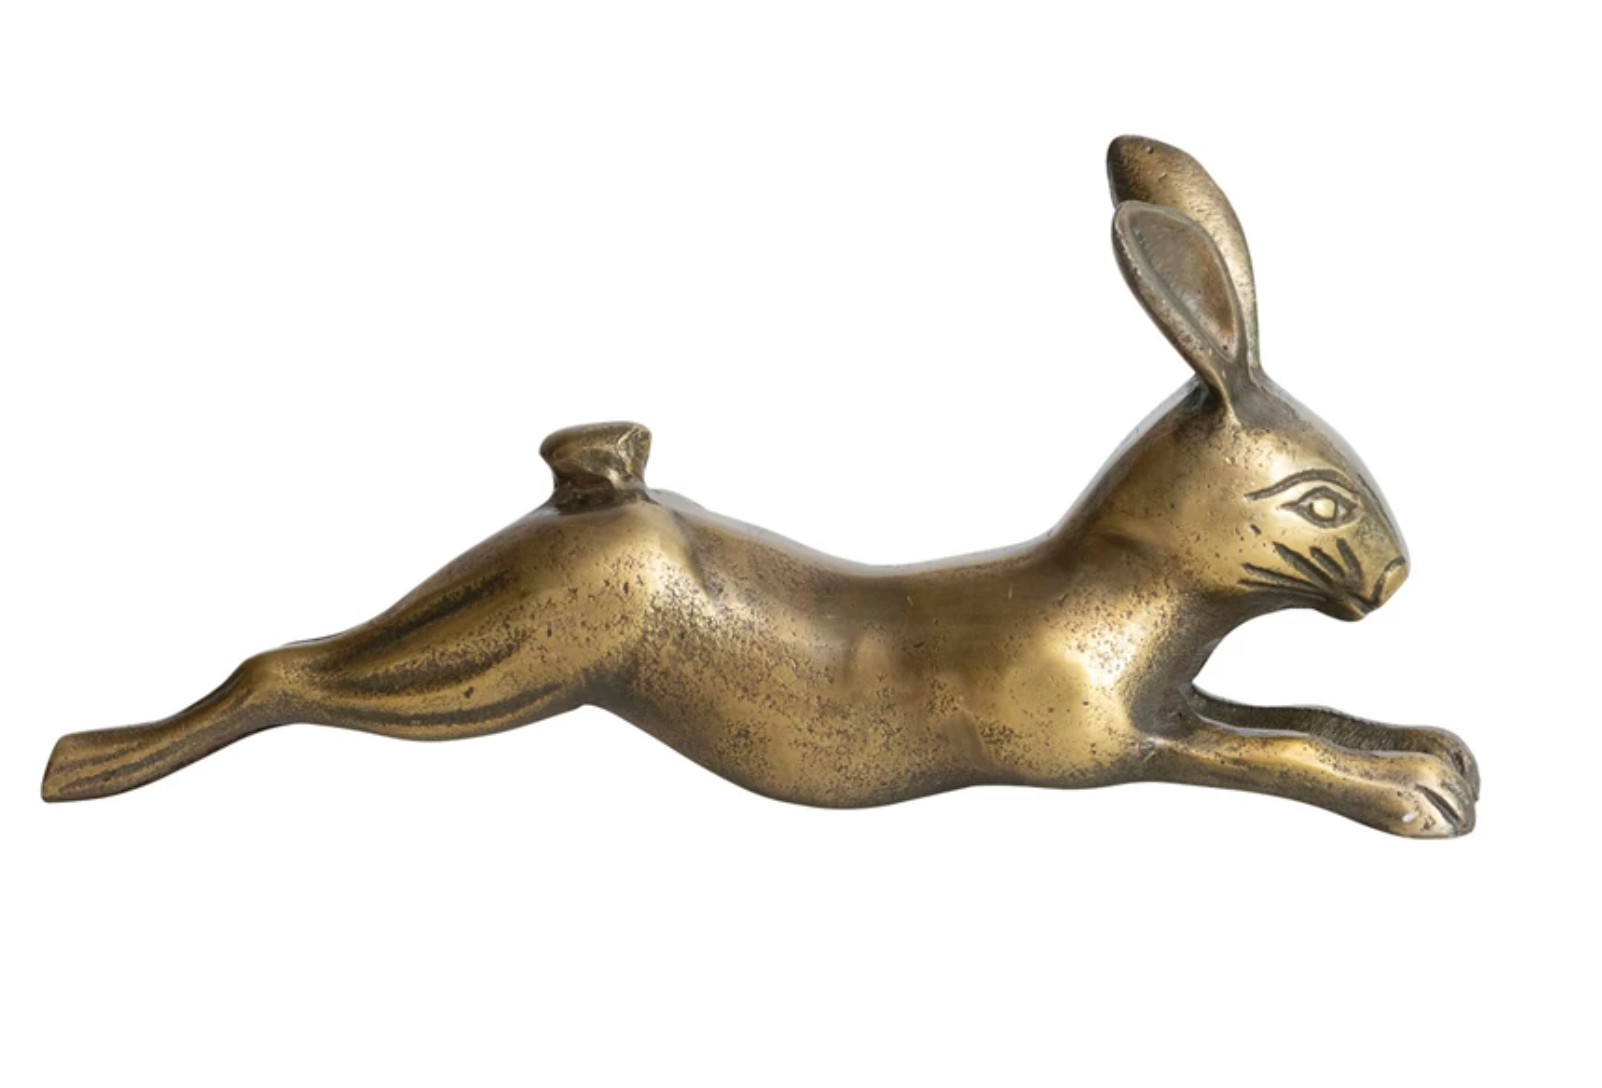 Leaping Rabbit with Antique Brass Finish